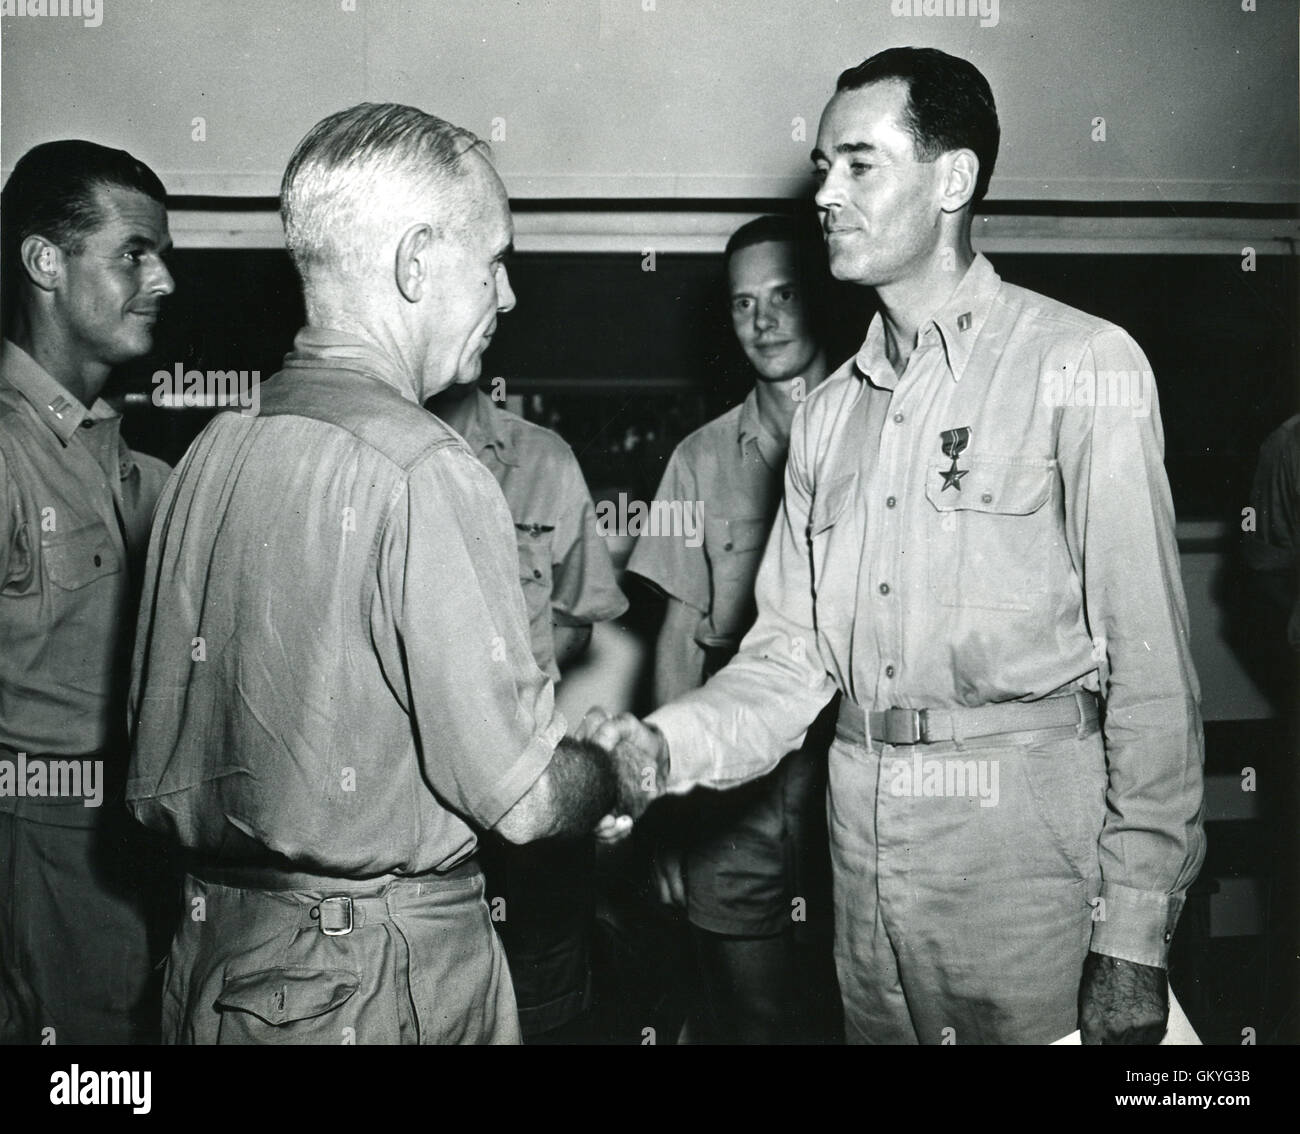 Lt. Henry Fonda is presented with a Bronze Star Medal for meritorious service as an Assistant Operations Officer and Air Combat Intelligence Officer during World War II. Stock Photo